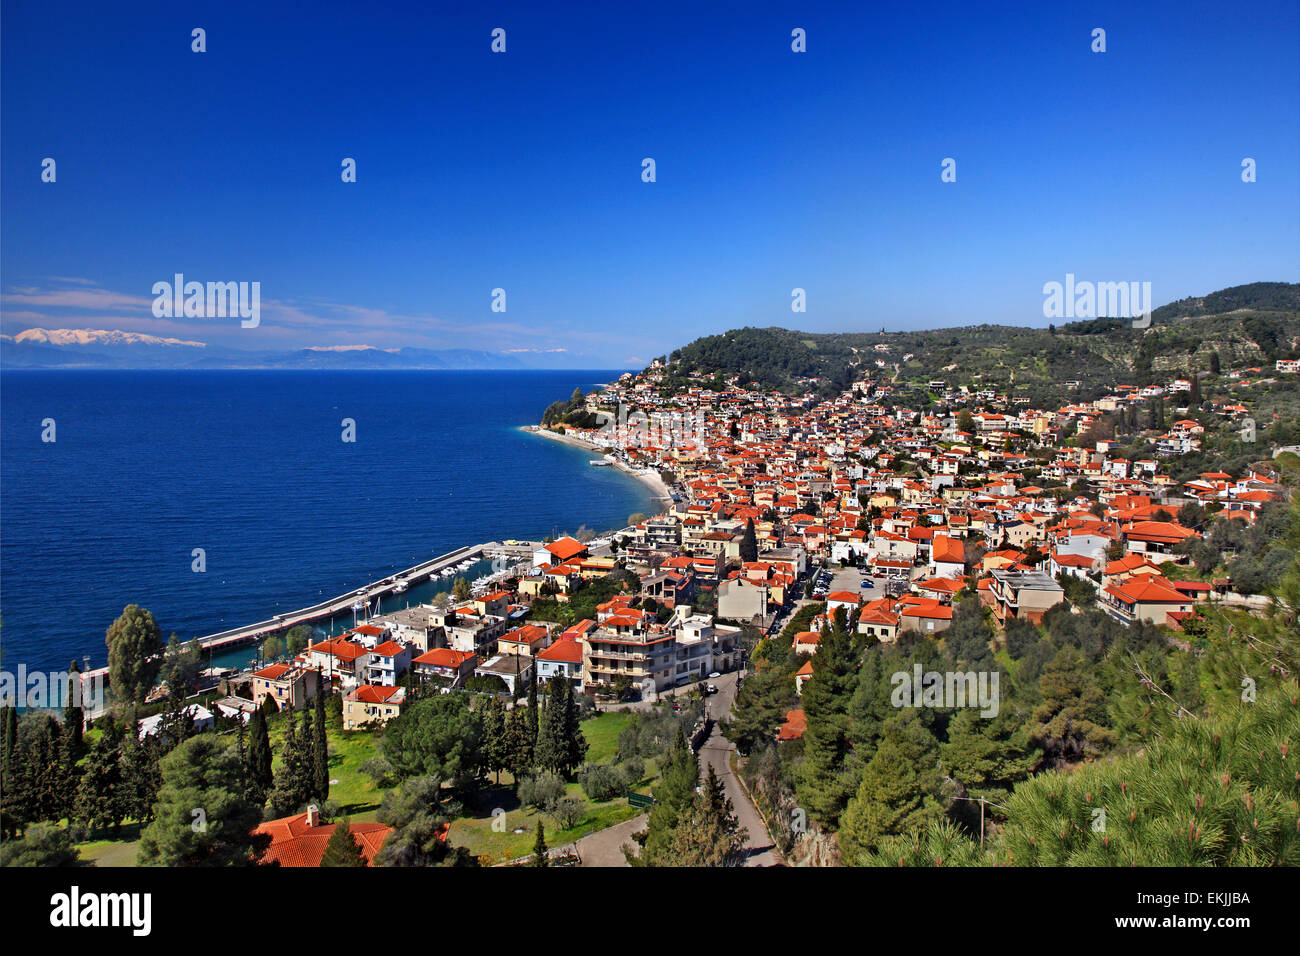 Limni, one of the most beautiful towns of Evia (Euboea) island (Greece) Stock Photo